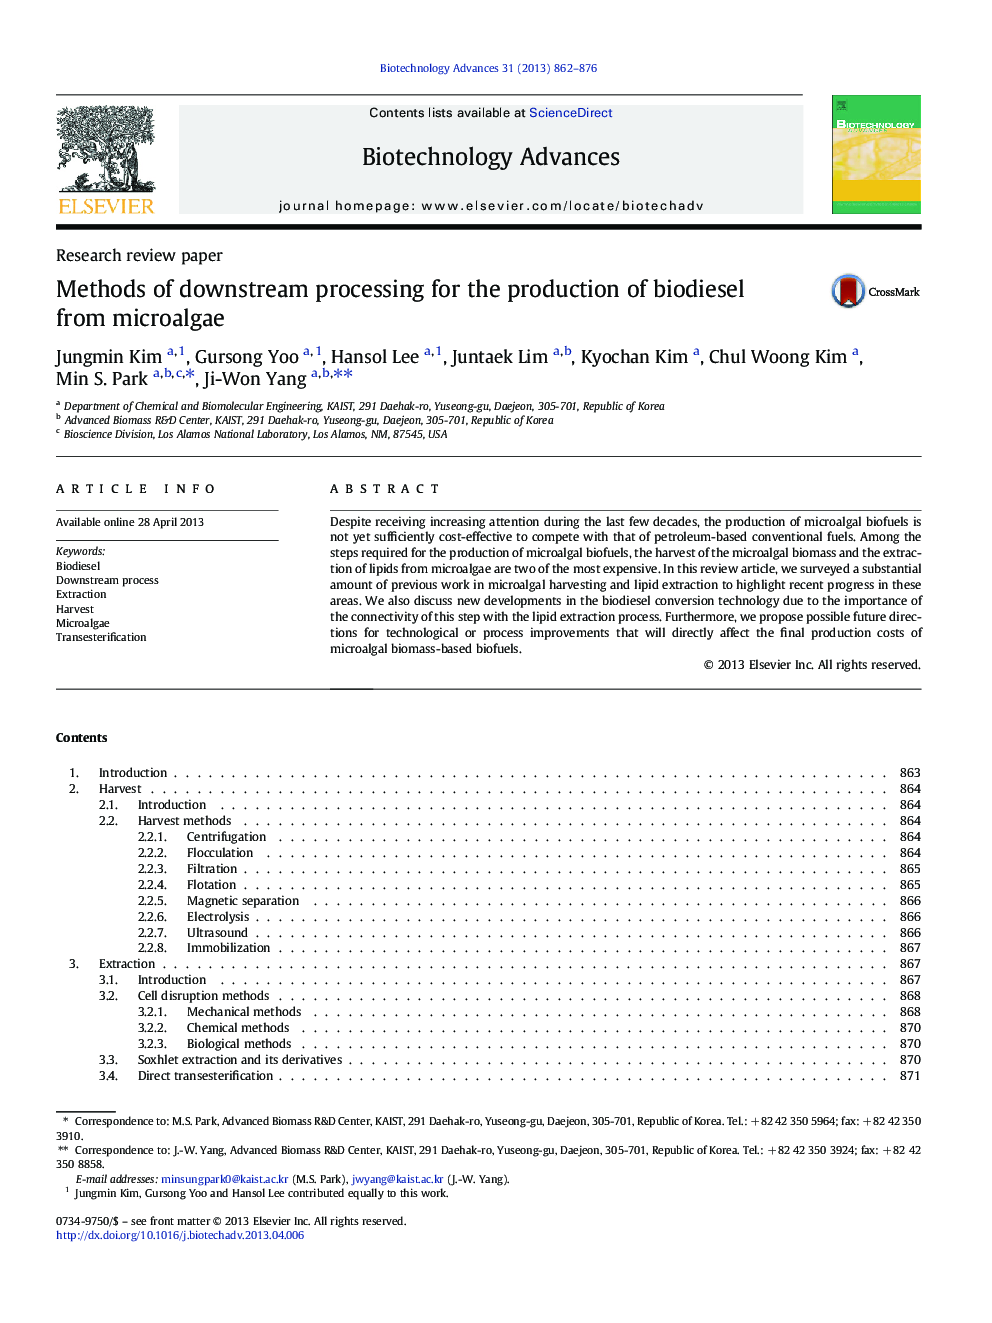 Methods of downstream processing for the production of biodiesel from microalgae